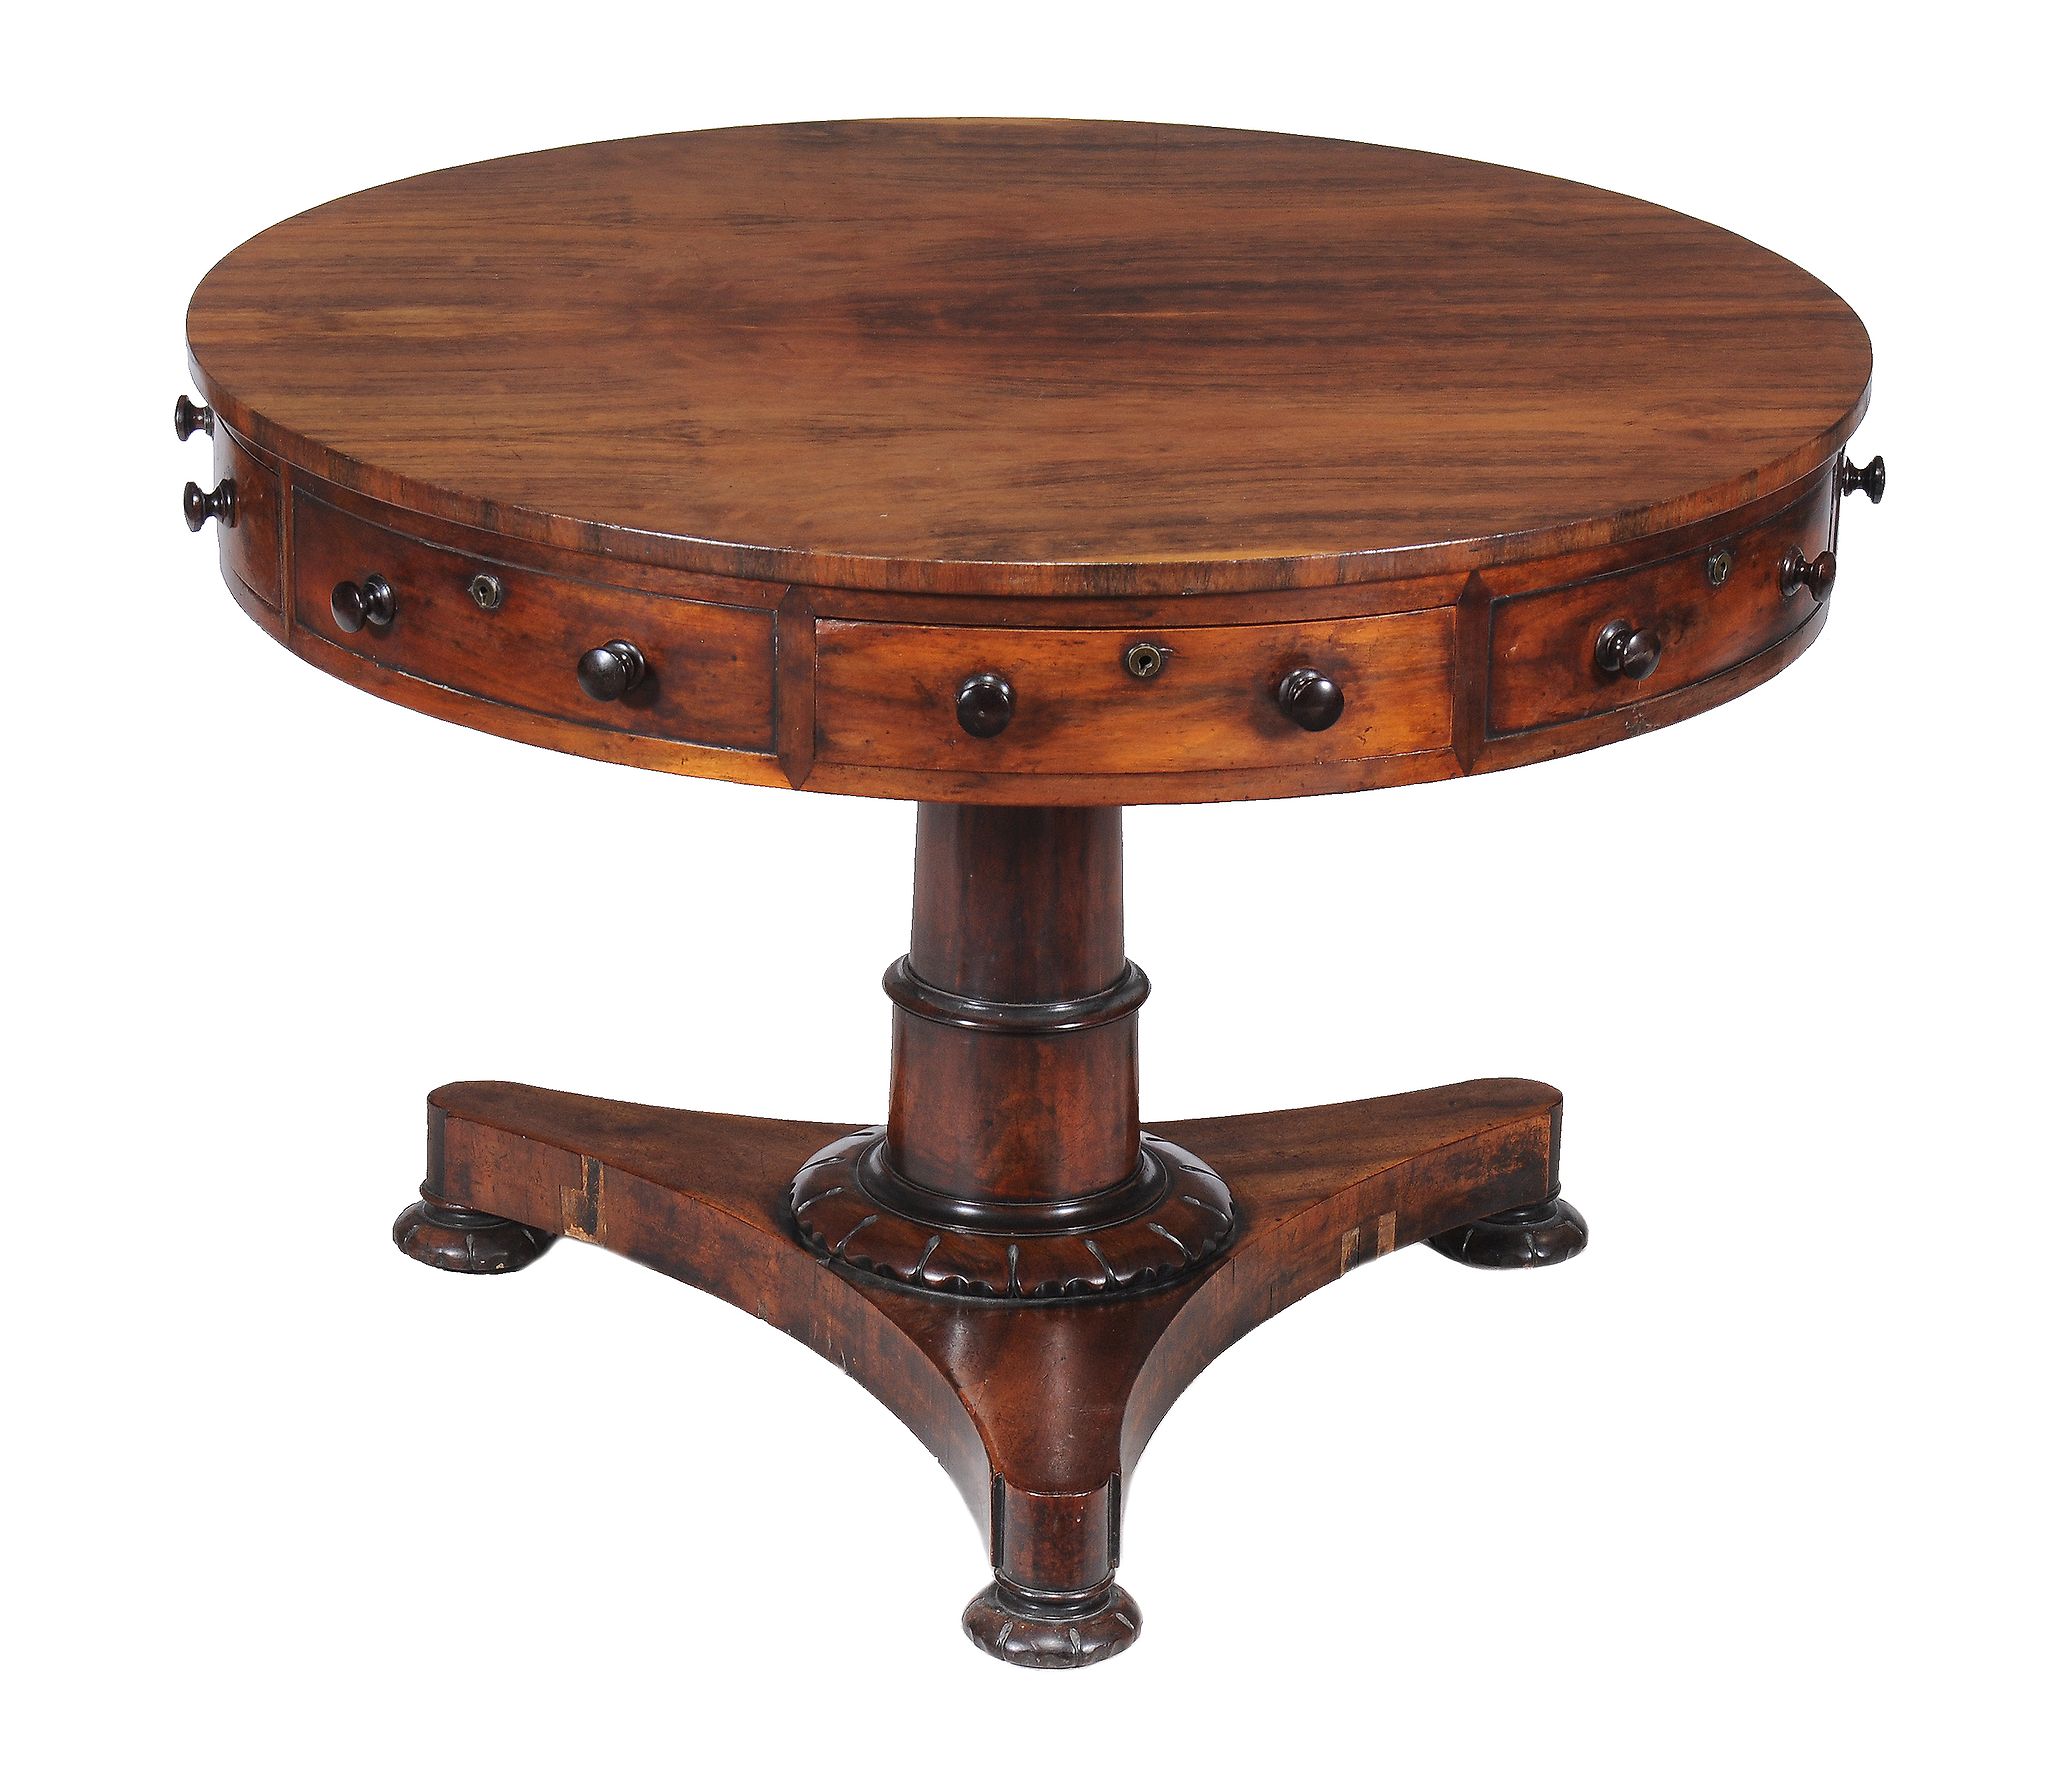 A George IV goncalo alves drum table , circa 1825, the frieze with four drawers interspersed with